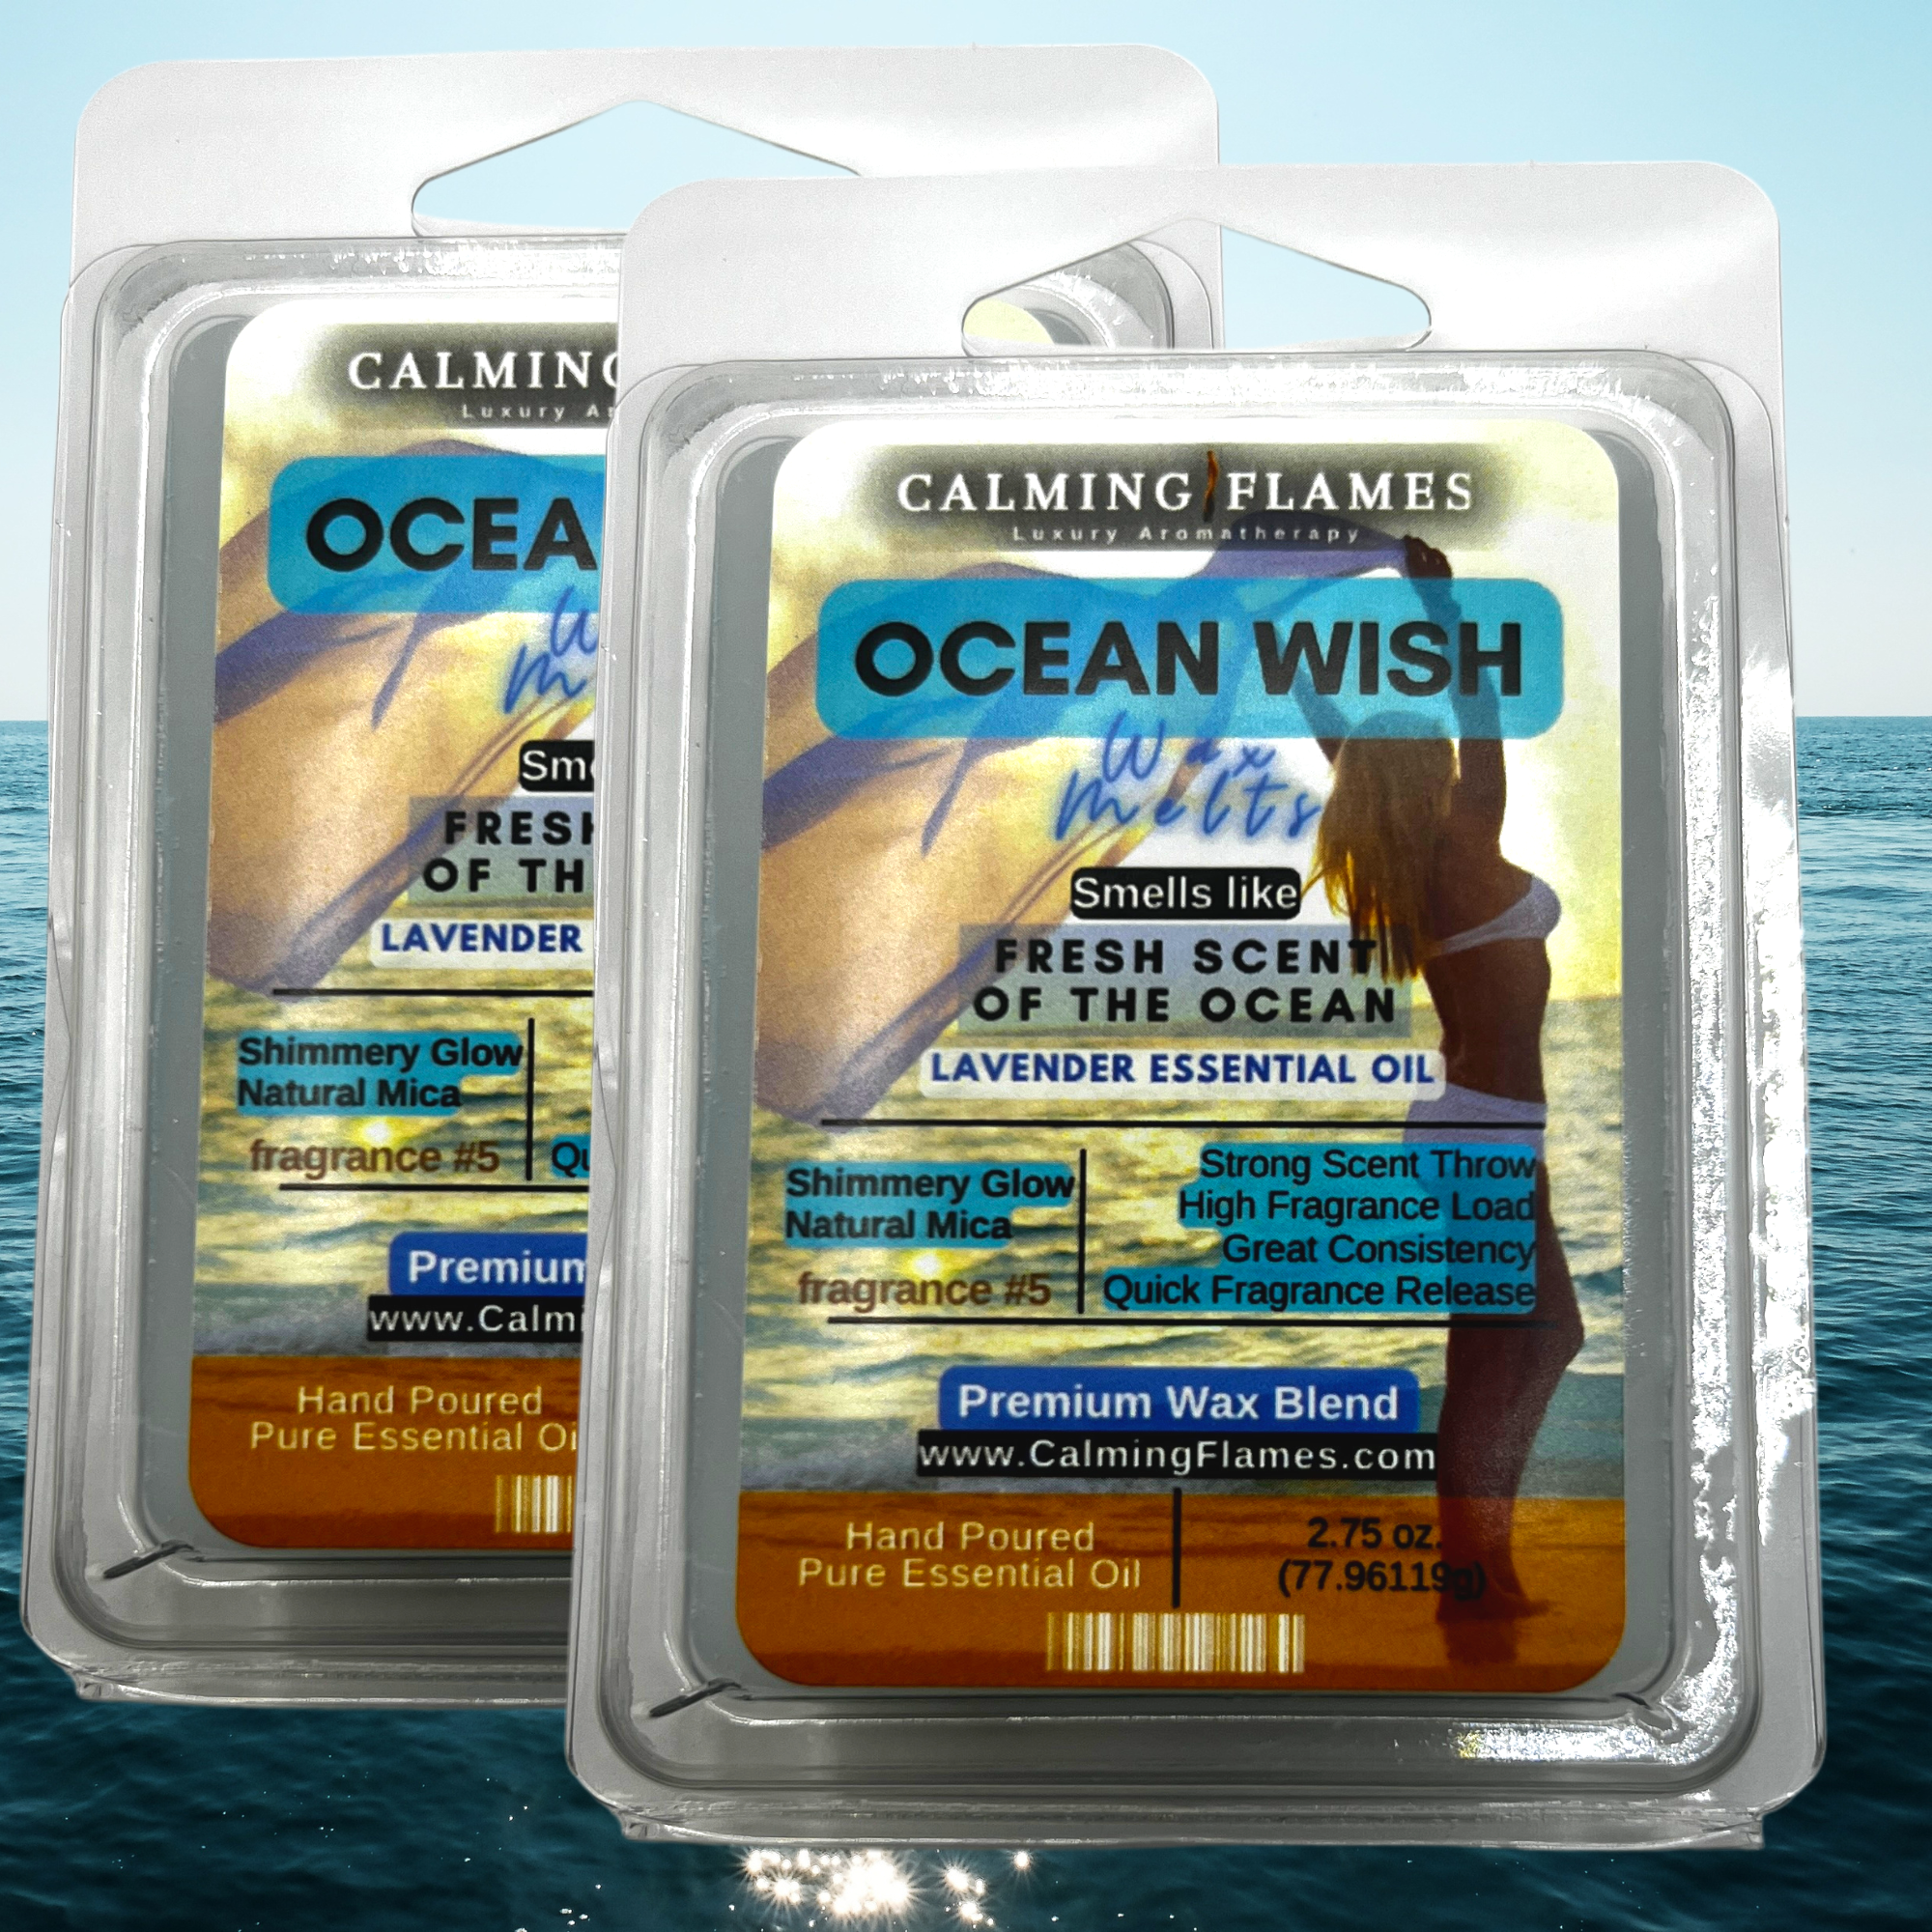 Ocean Scented Wax Melts "OCEAN WISH" Highly Scented Wax Melts (2-Packs)